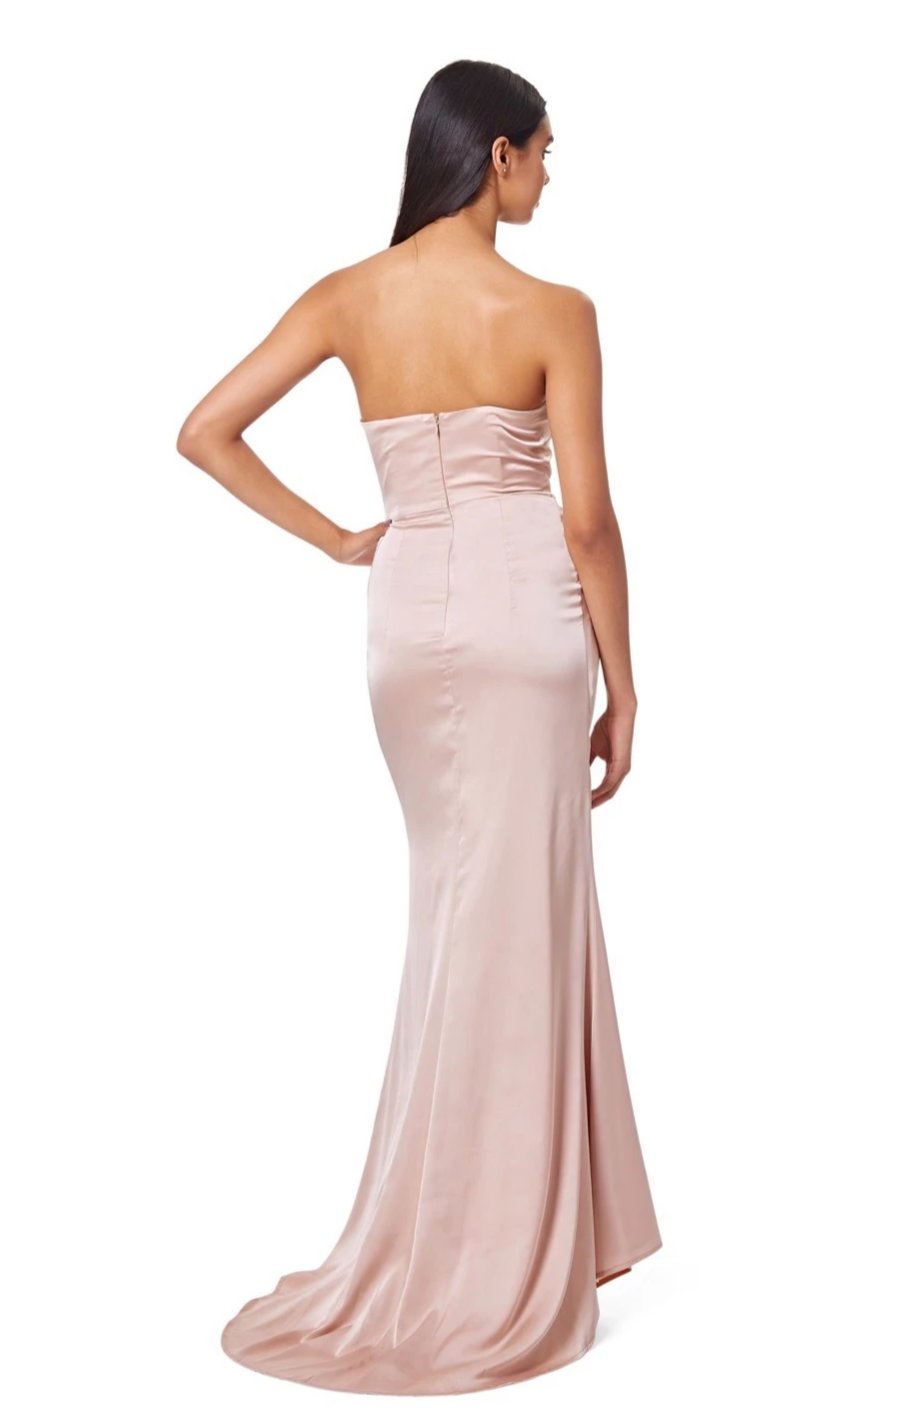 Paige Strapless Ruched Maxi Dress with Thigh High Slit